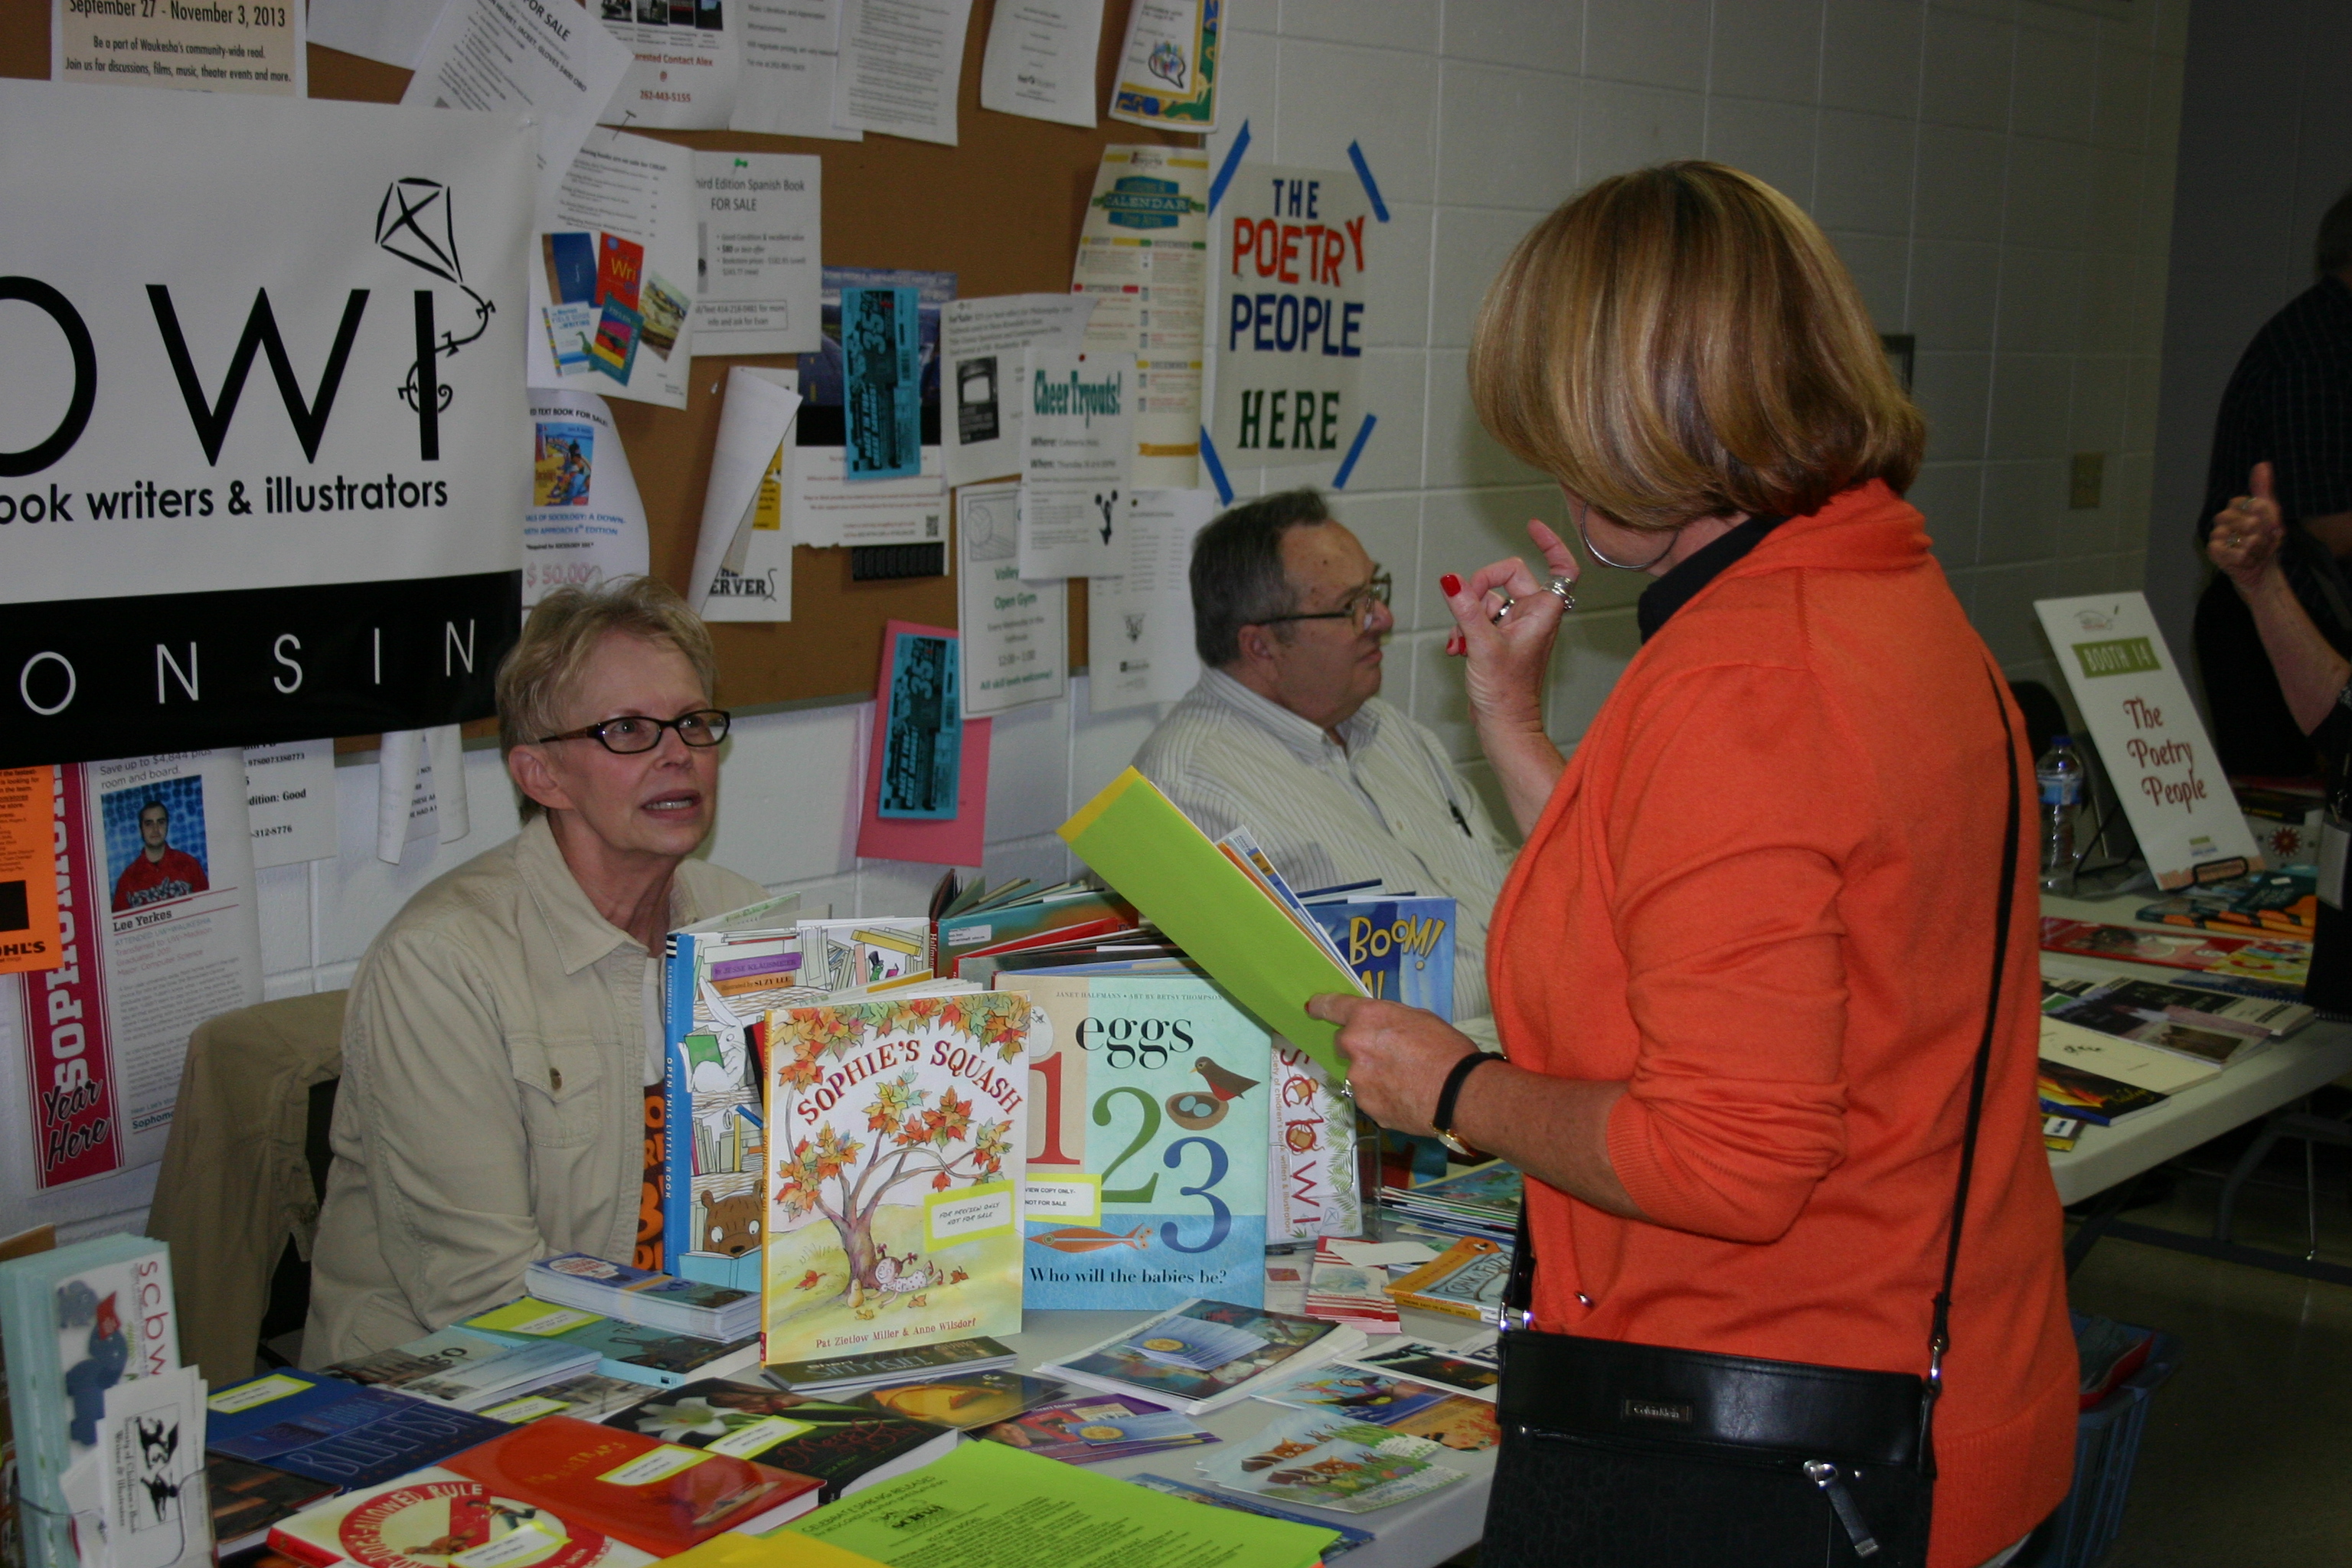 Exhibitors at the 2013 Festival of Books